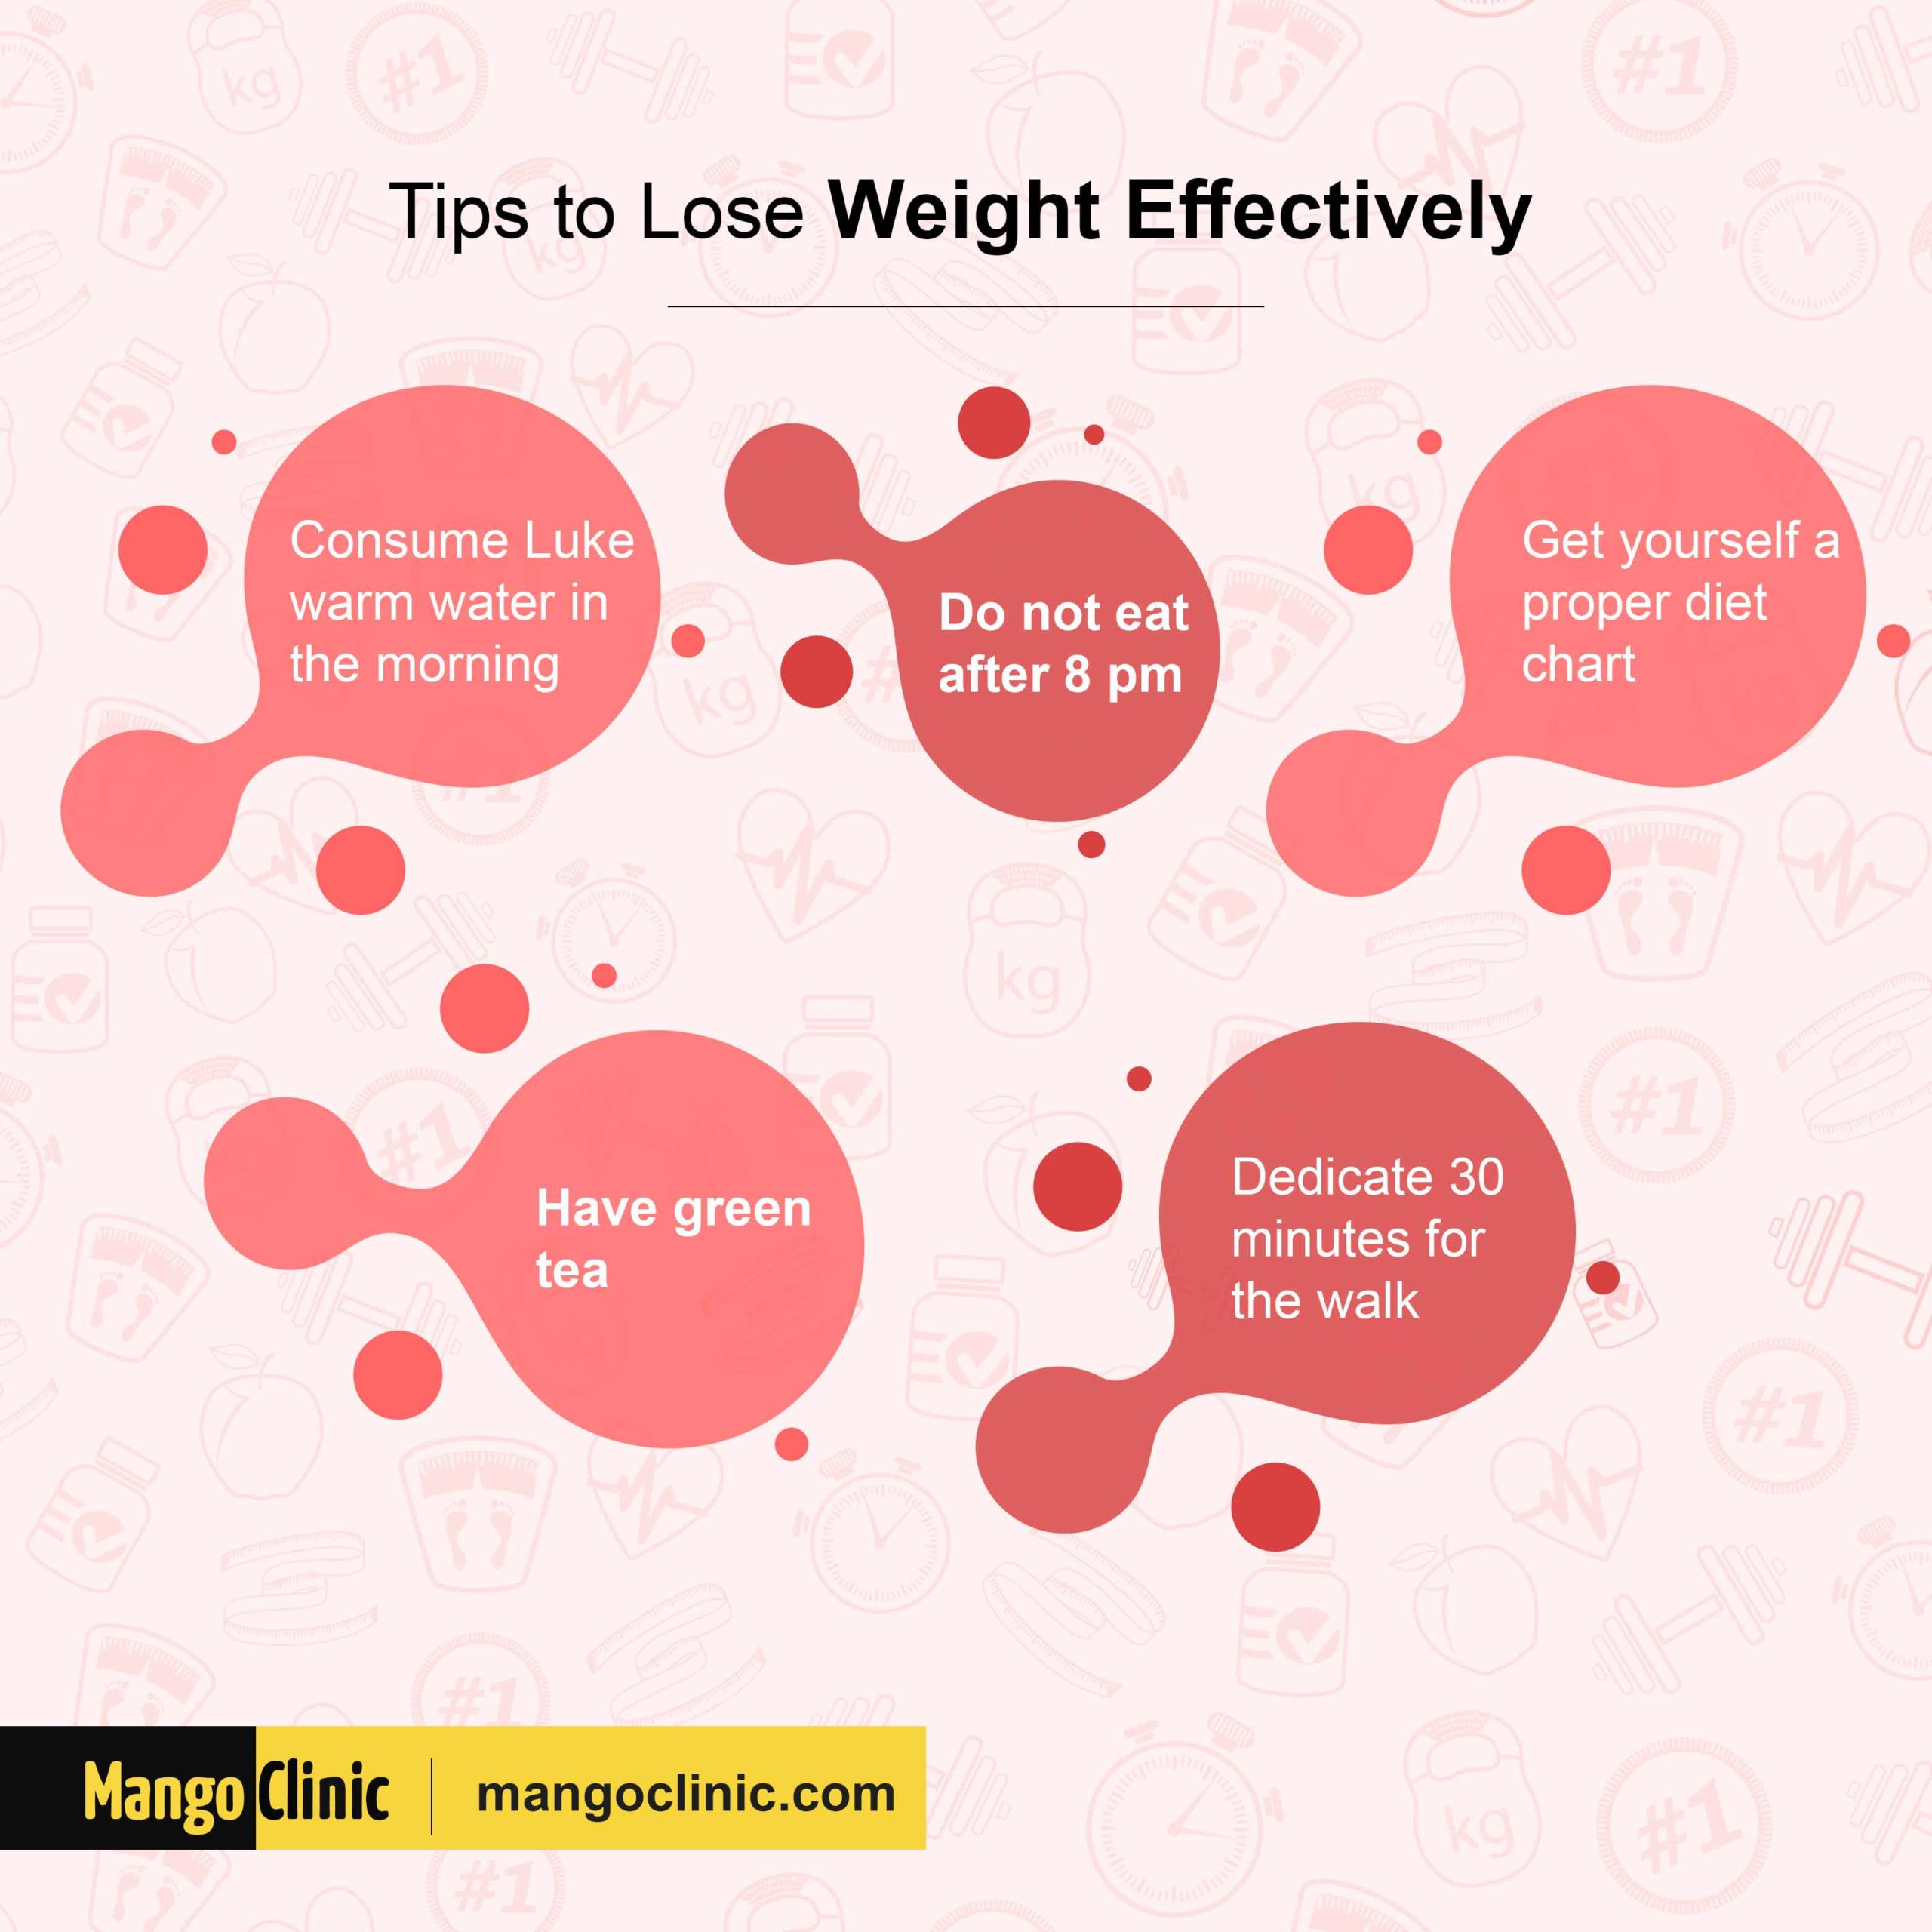 Tips to Lose Weight Effectively